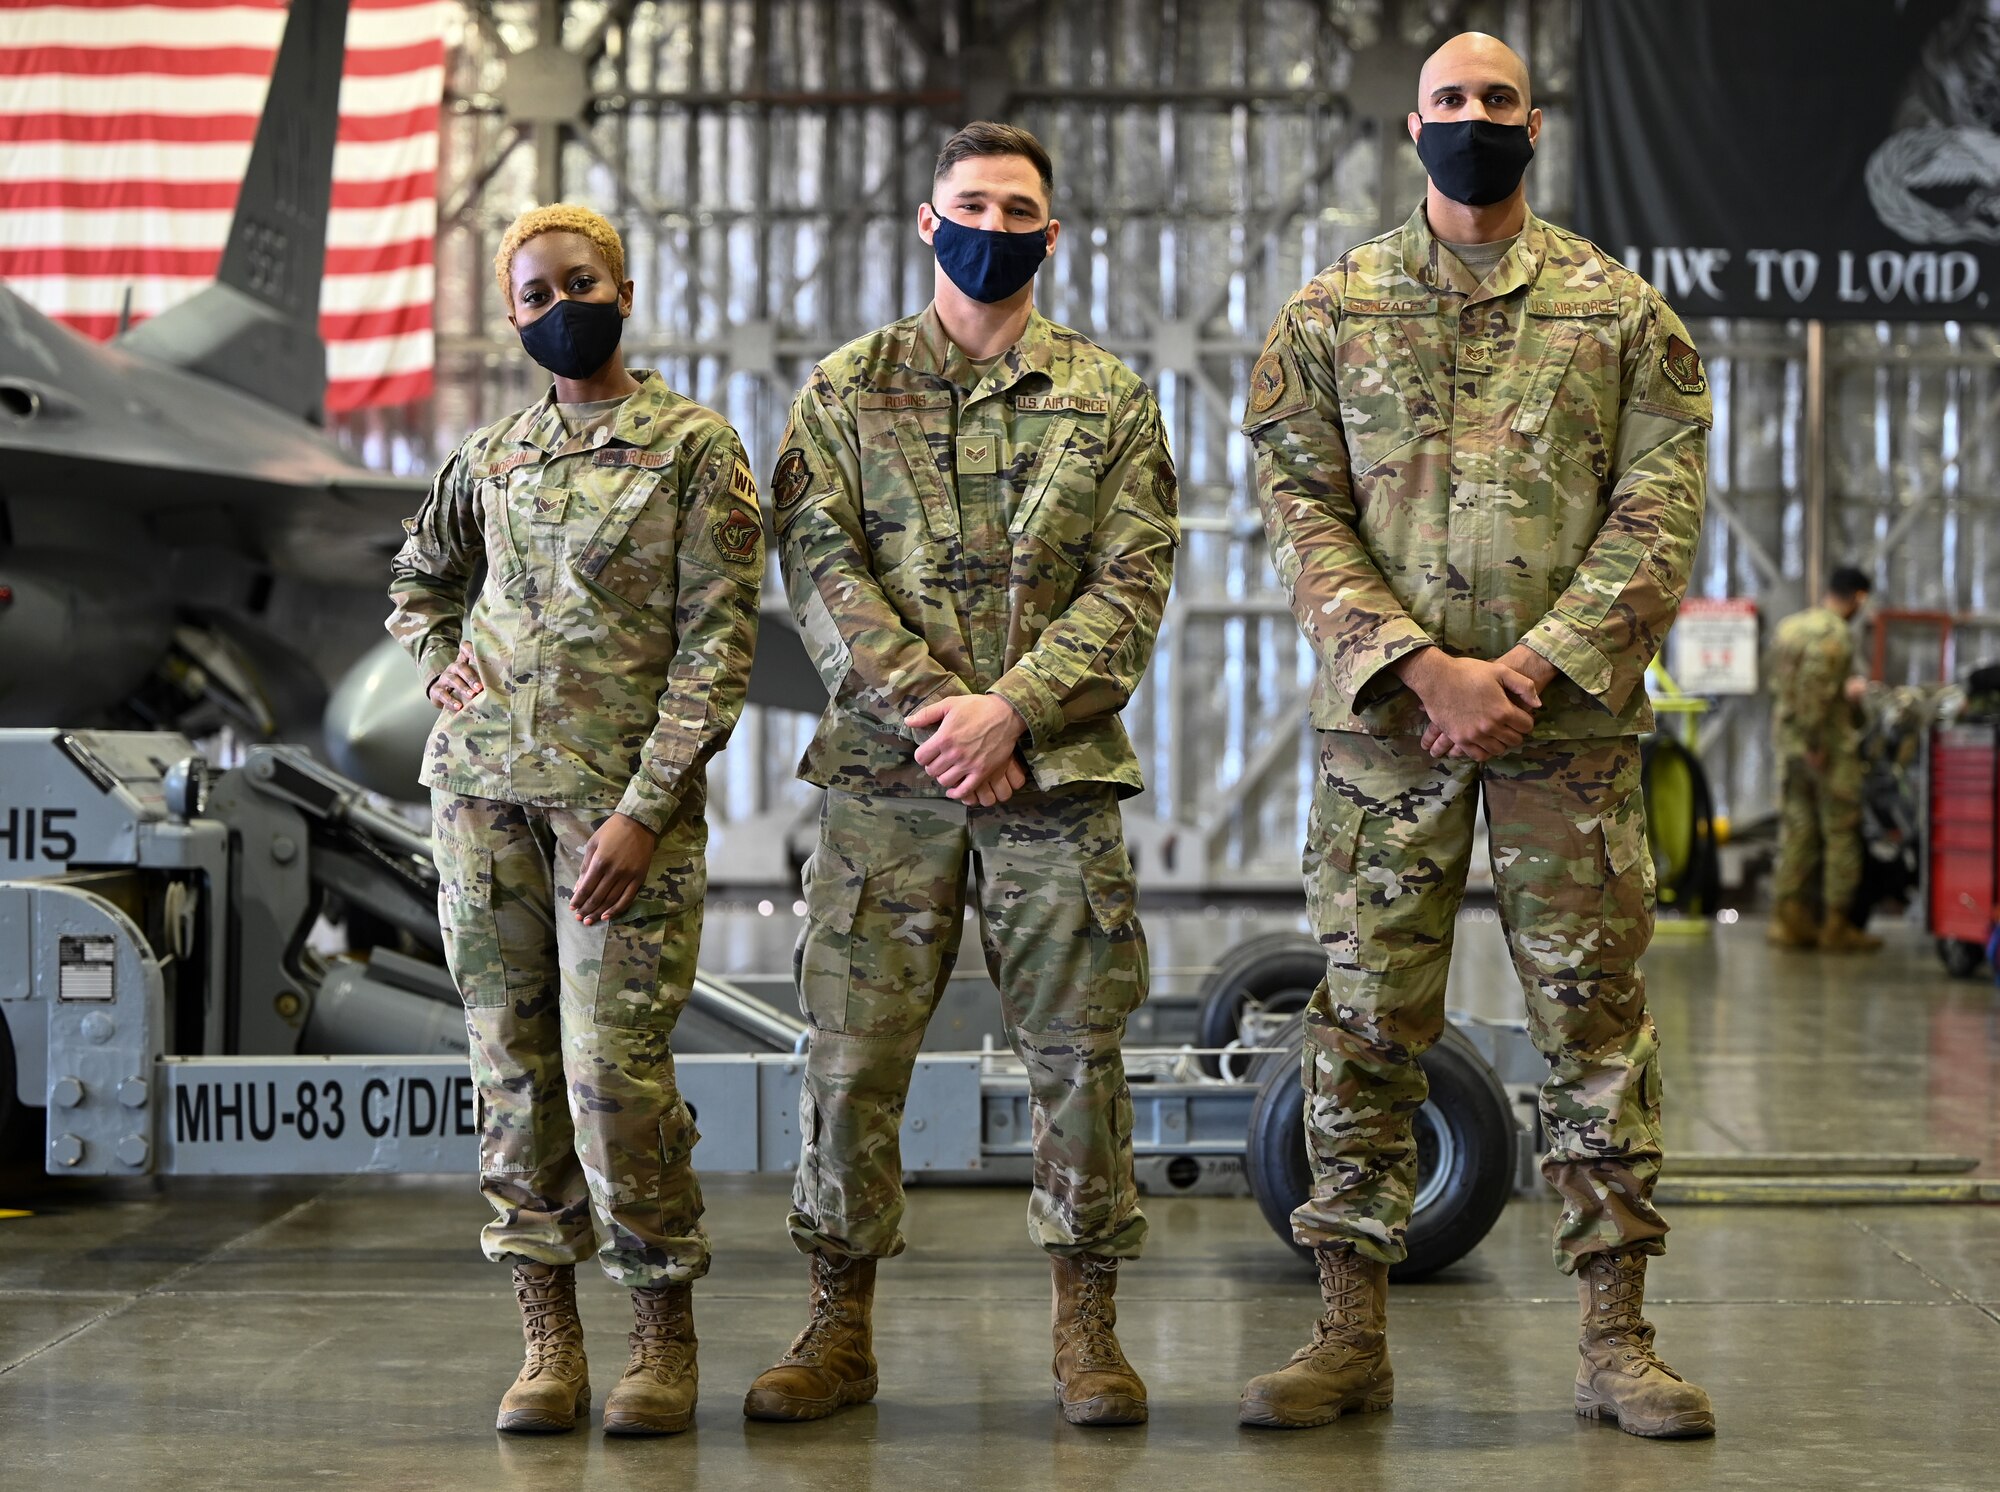 Senior Airmen JoAnn Morgan (left), Ryan Robins (center), both 13th Aircraft Maintenance Unit weapons load crew members, and Staff Sgt. Jonathan Gonzales, a 13th AMU weapons load crew chief, stand in front of the F-16 Fighting Falcon they’ll configure with munitions during the 4th quarter Load Competition at Misawa Air Base, Japan, Mar. 19, 2021.